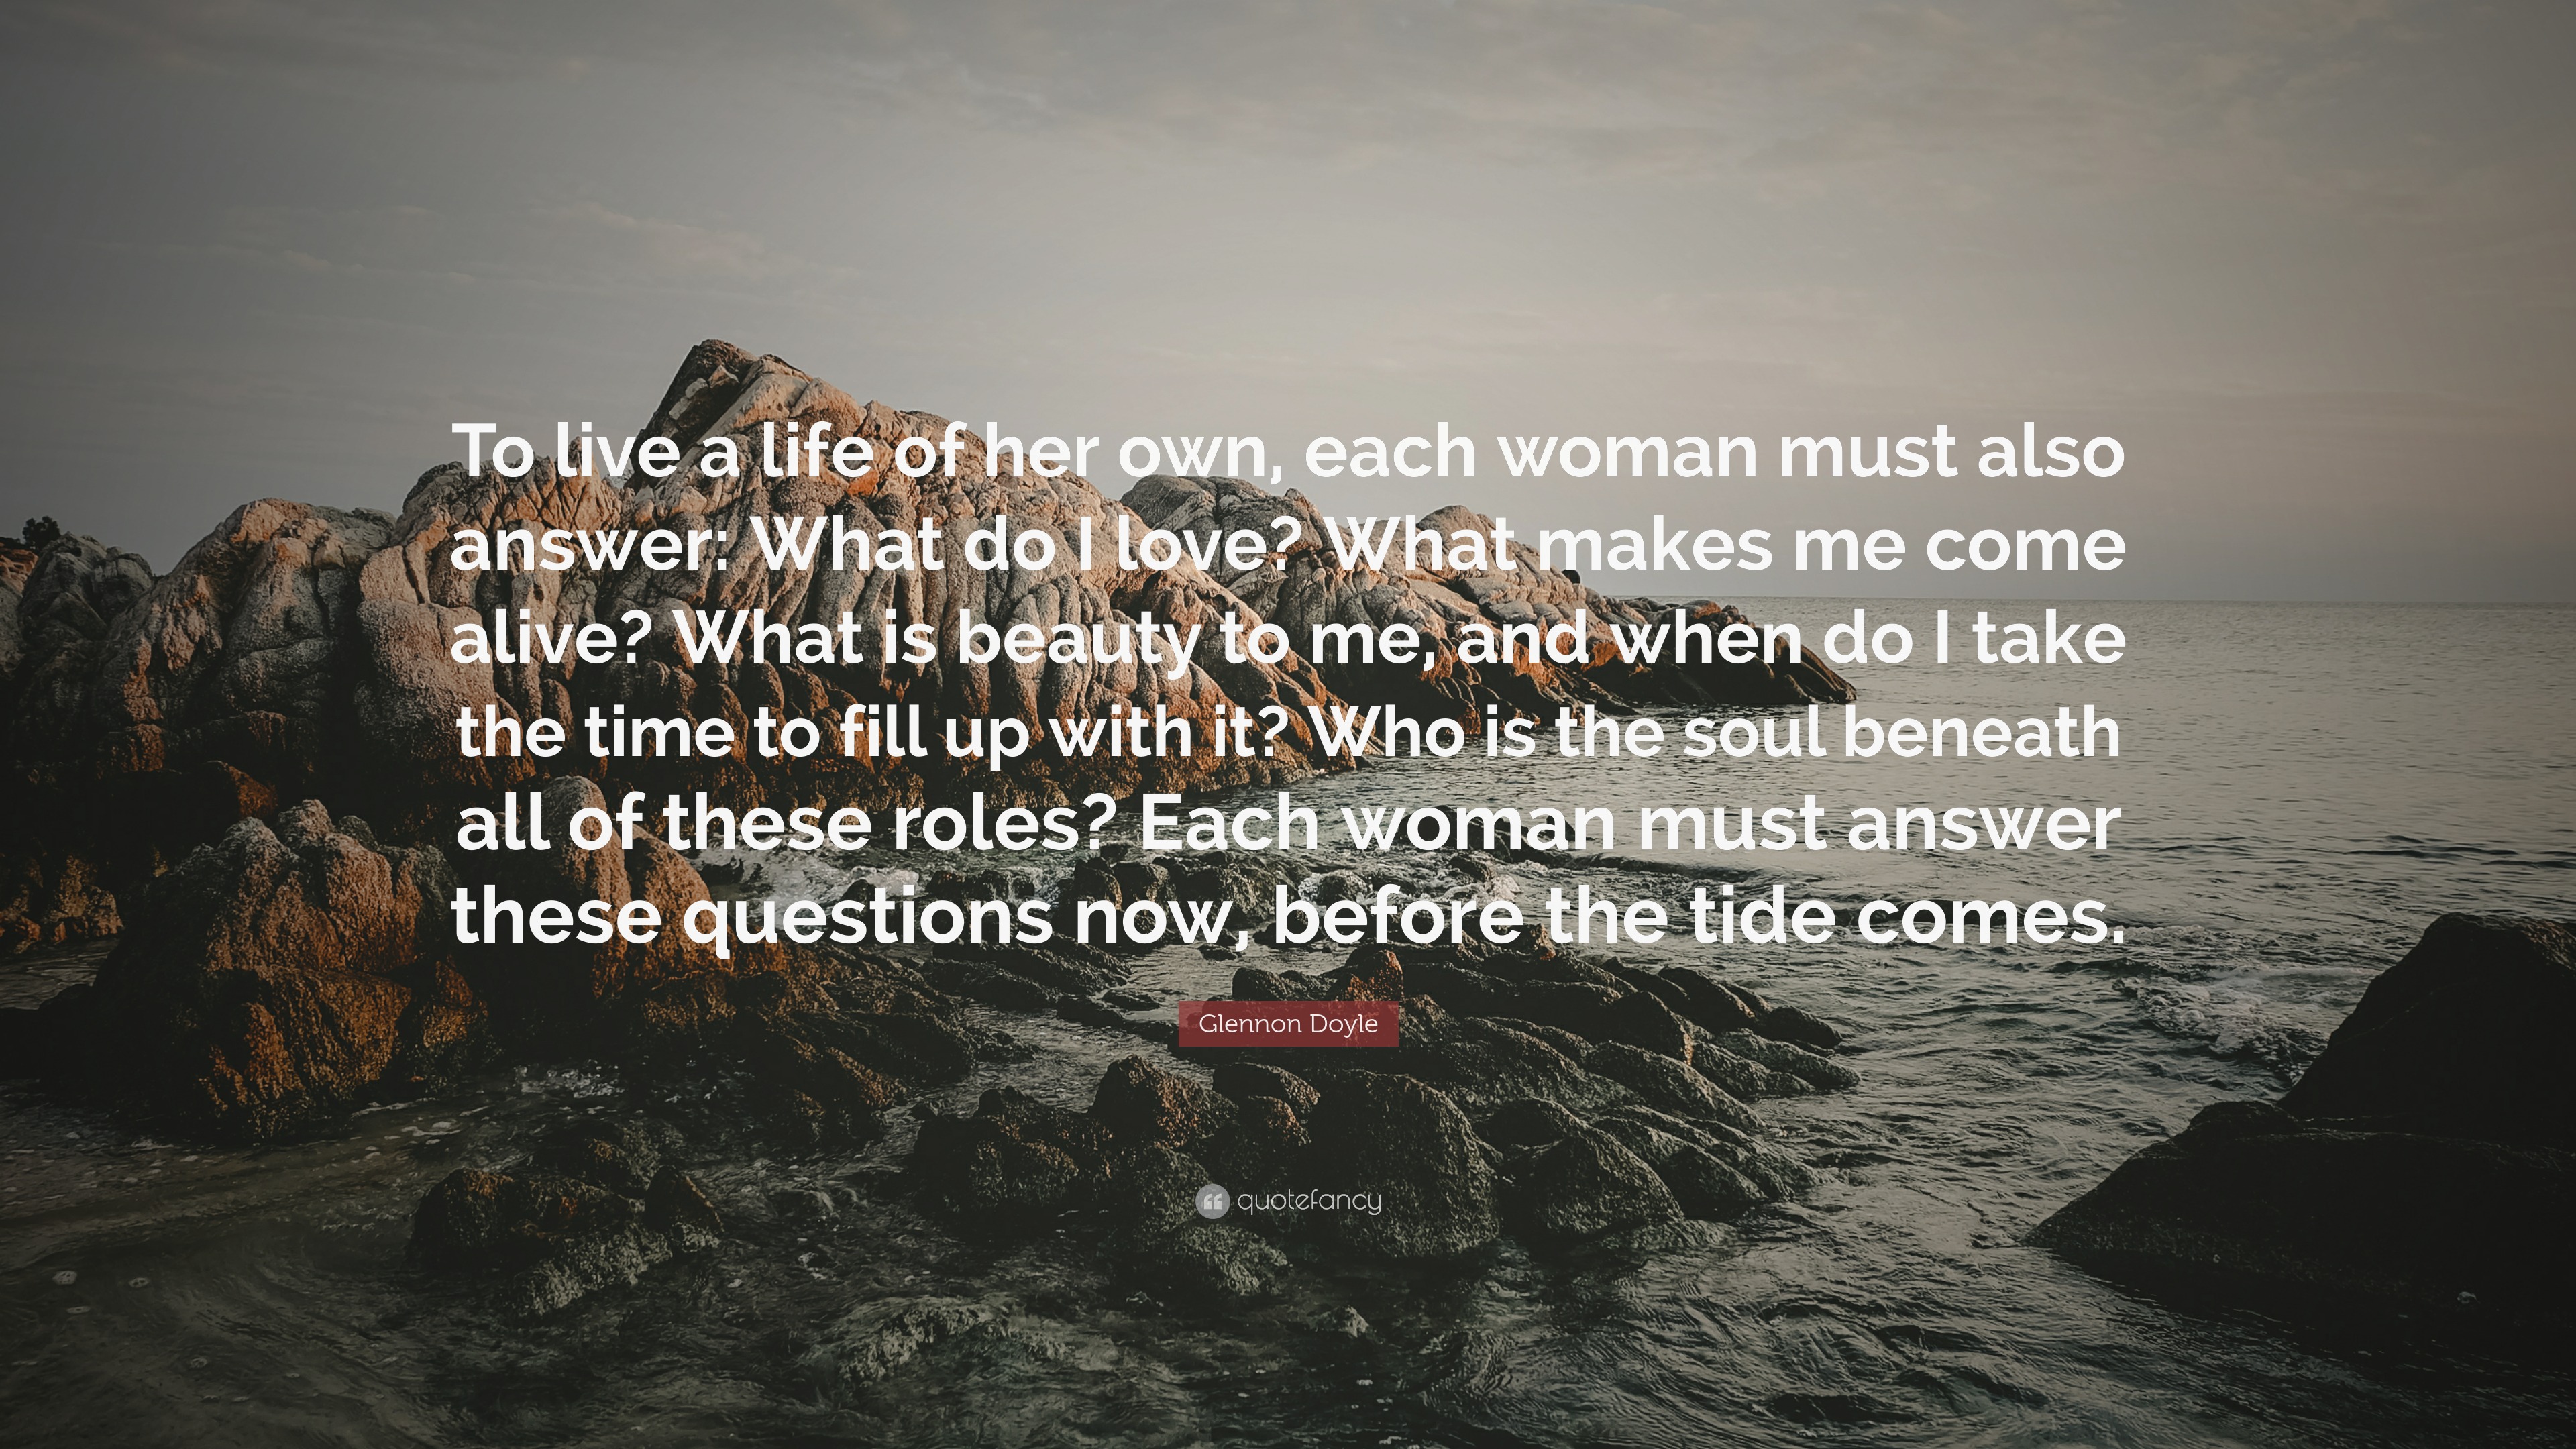 Glennon Doyle Quote: “To live a life of her own, each woman must also  answer: What do I love? What makes me come alive? What is beauty to me, ”